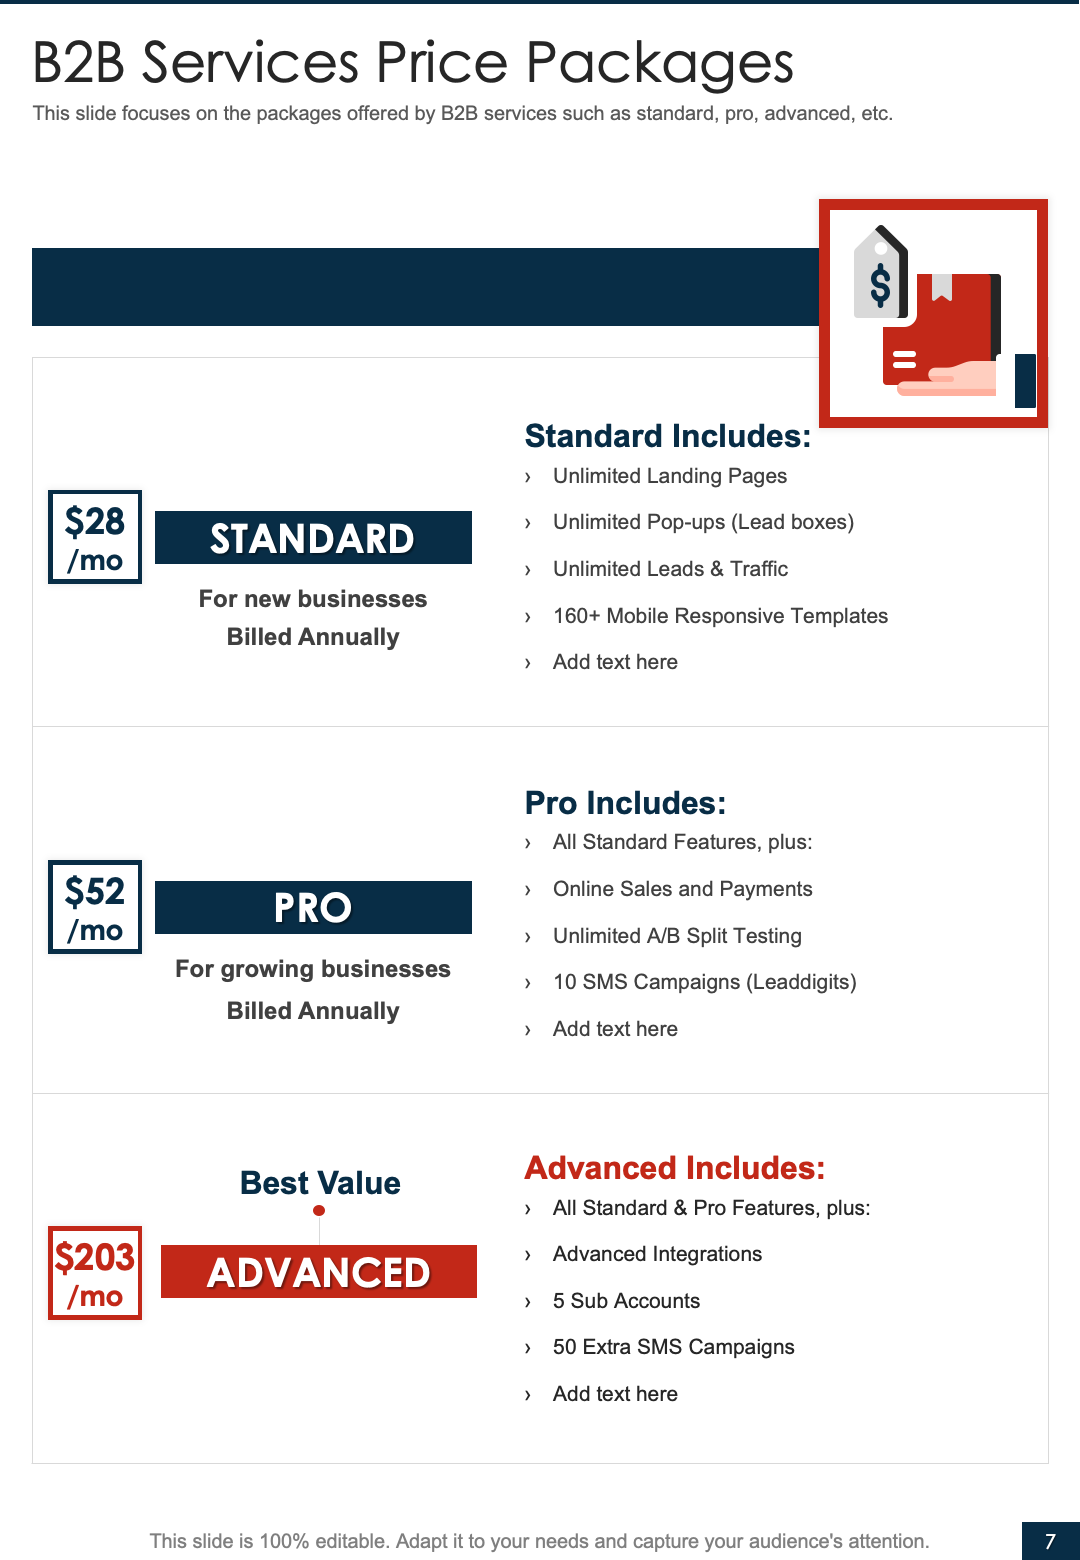 B2B Services Price Packages